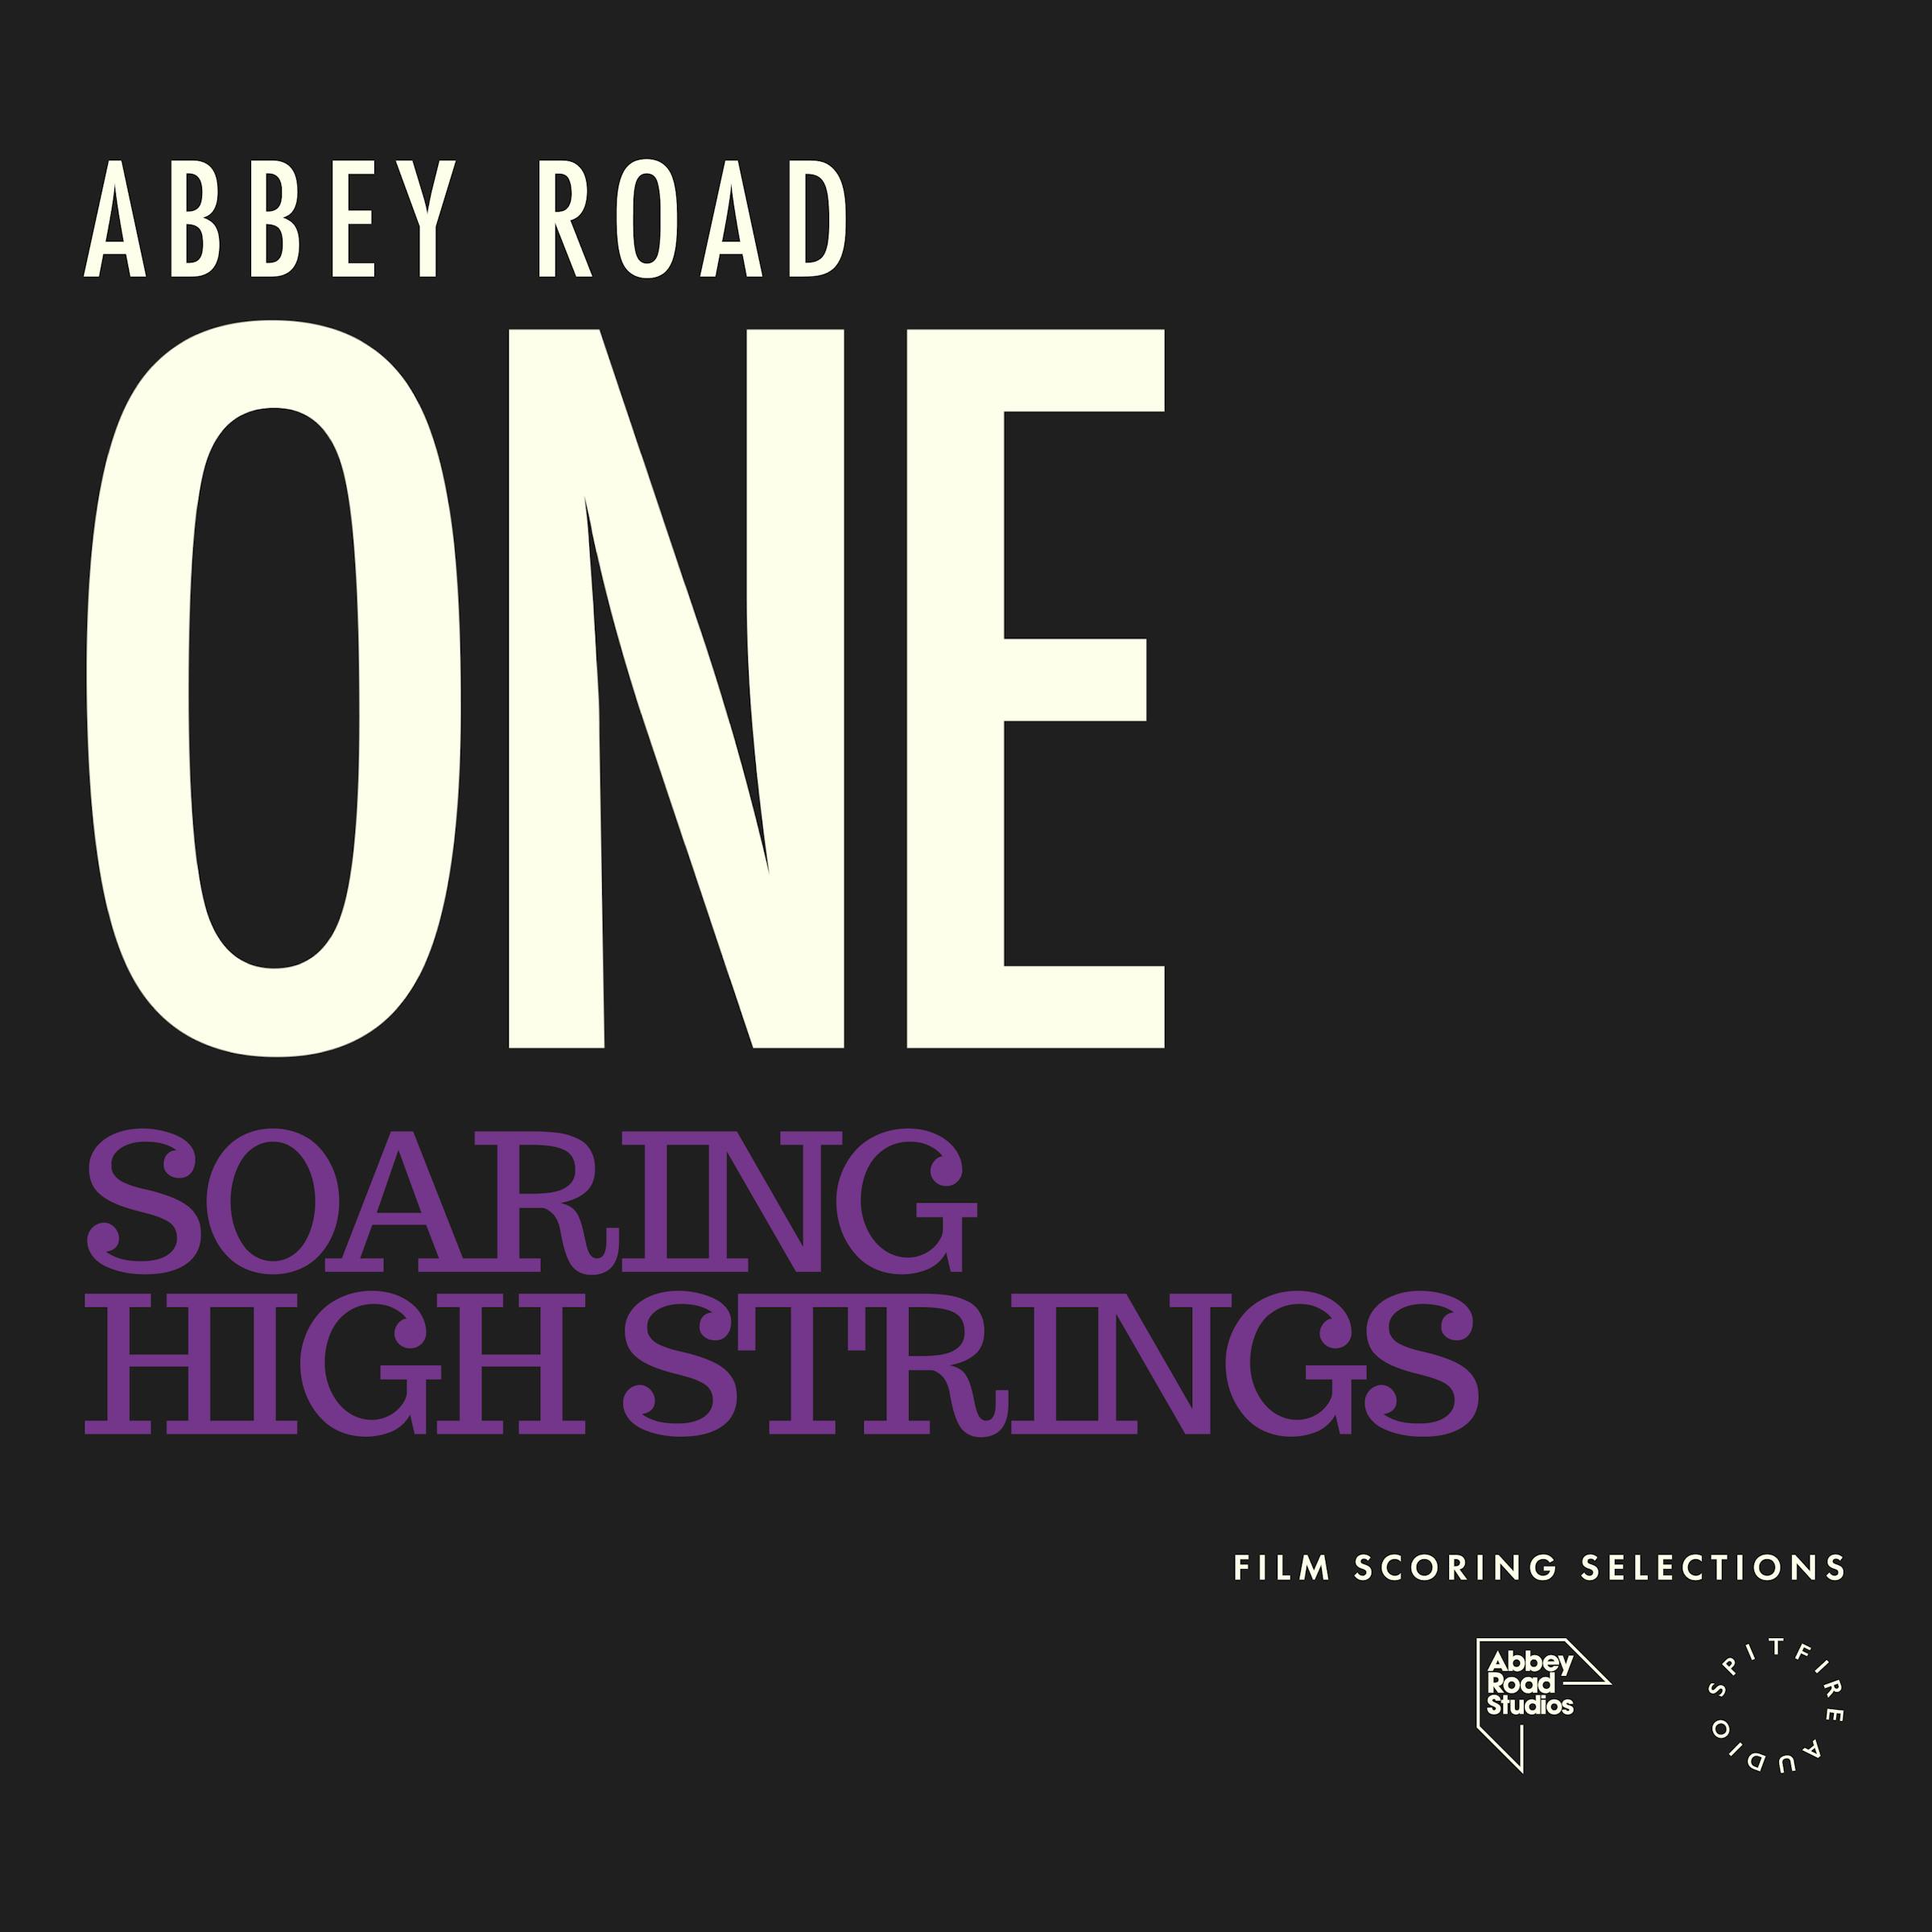 Abbey Road ONE: Soaring High Strings